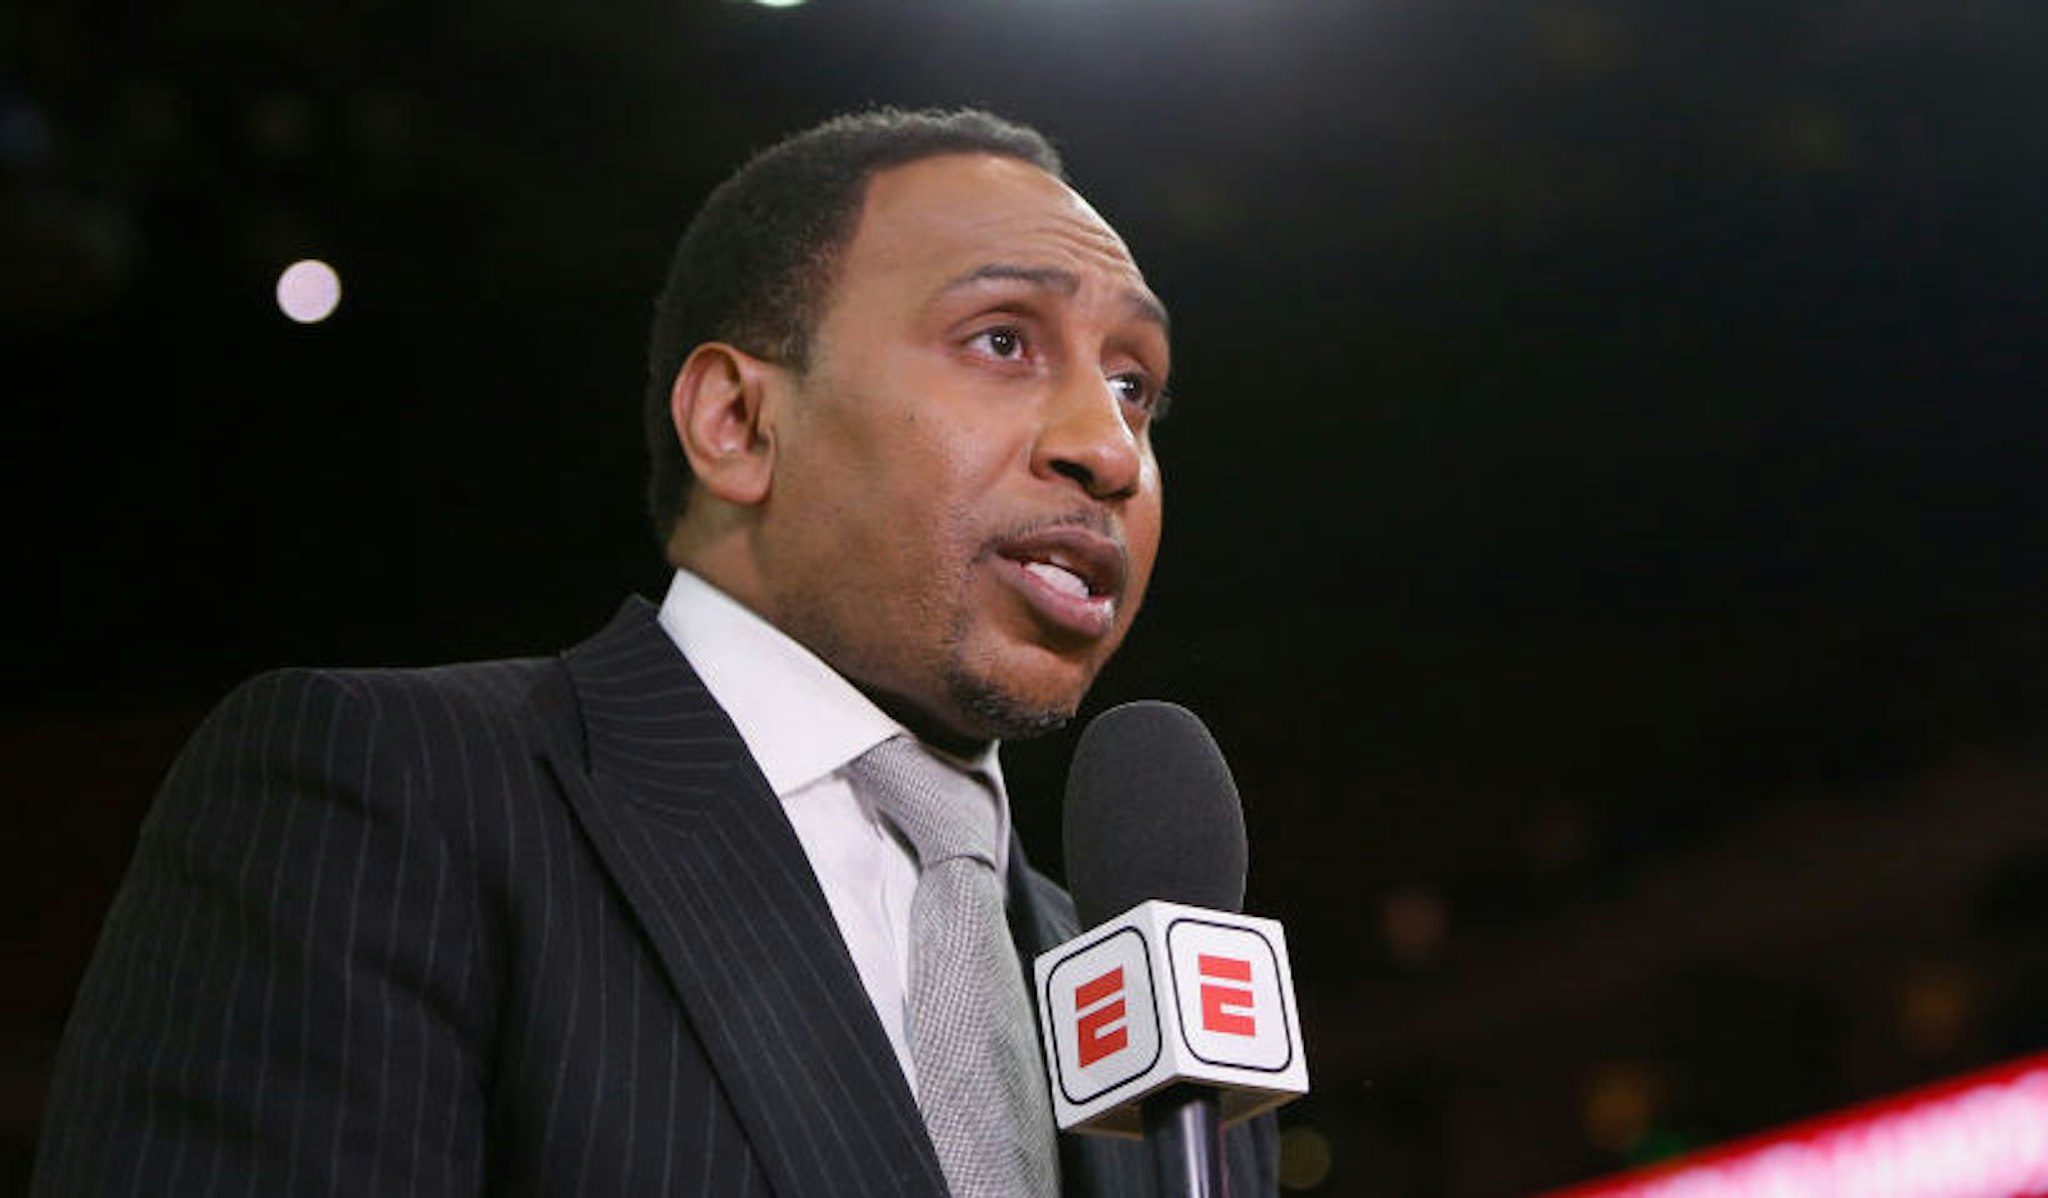 TV analyst Stephen A. Smith reports from court side before Game Five of the Western Conference Semifinals of the 2019 NBA Playoffs at ORACLE Arena on May 08, 2019 in Oakland, California. NOTE TO USER: User expressly acknowledges and agrees that, by downloading and or using this photograph, User is consenting to the terms and conditions of the Getty Images License Agreement. (Photo by Lachlan Cunningham/Getty Images)